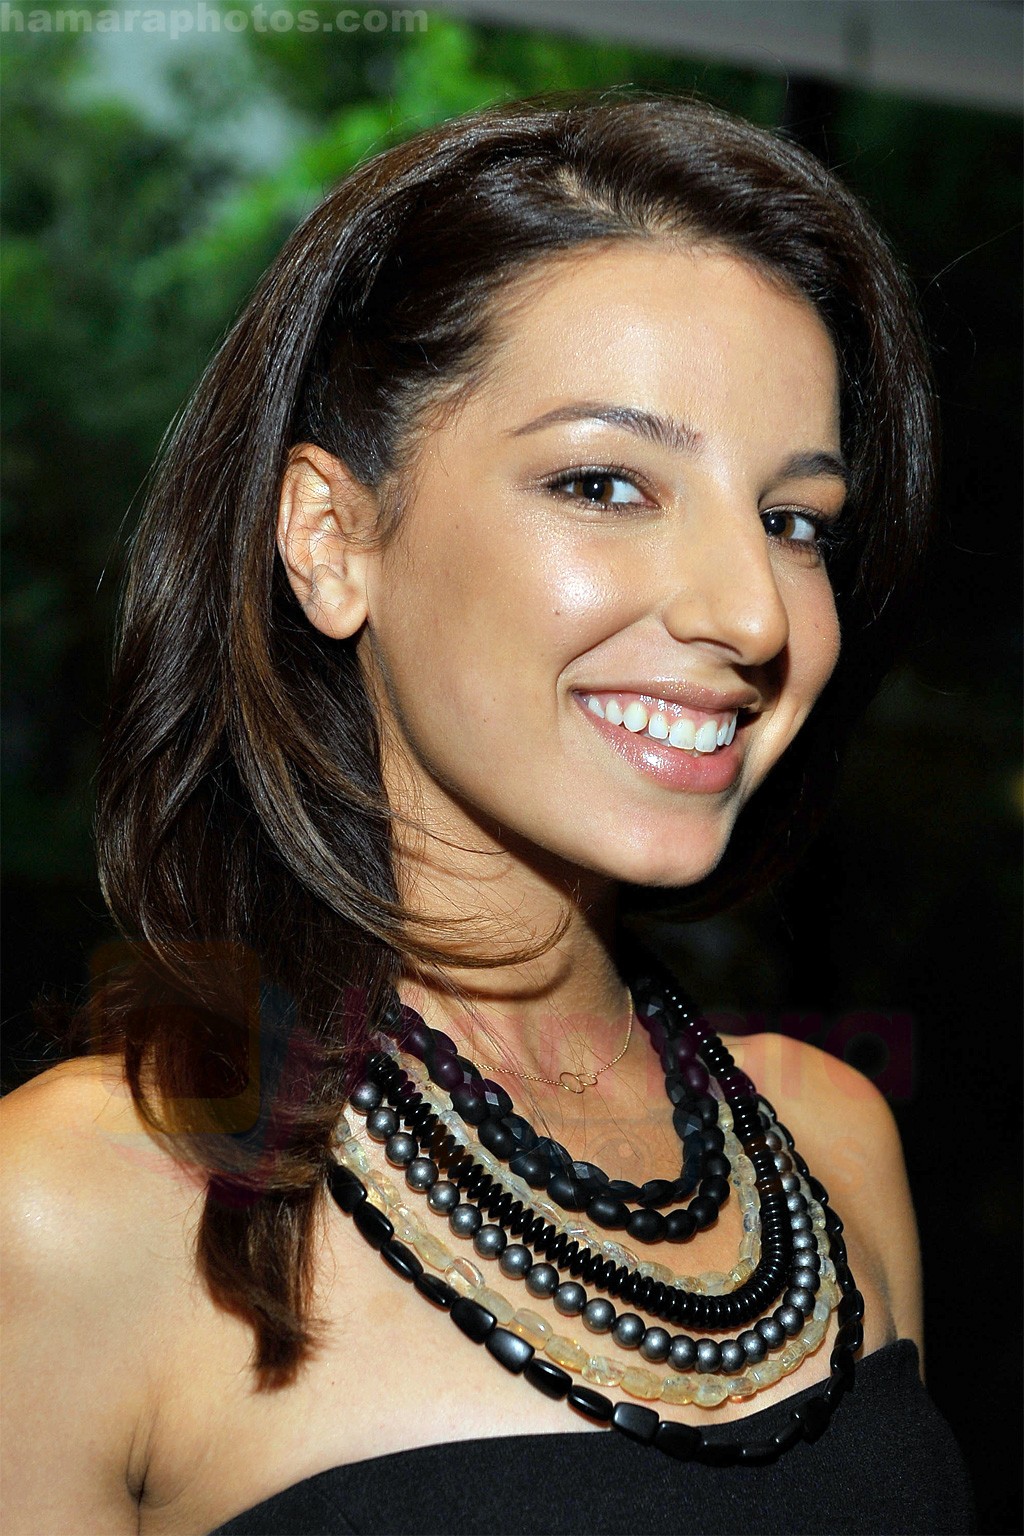 Vanessa Lengies at The Feed Health Backpack Event in Santa Monica on August 26th 2009